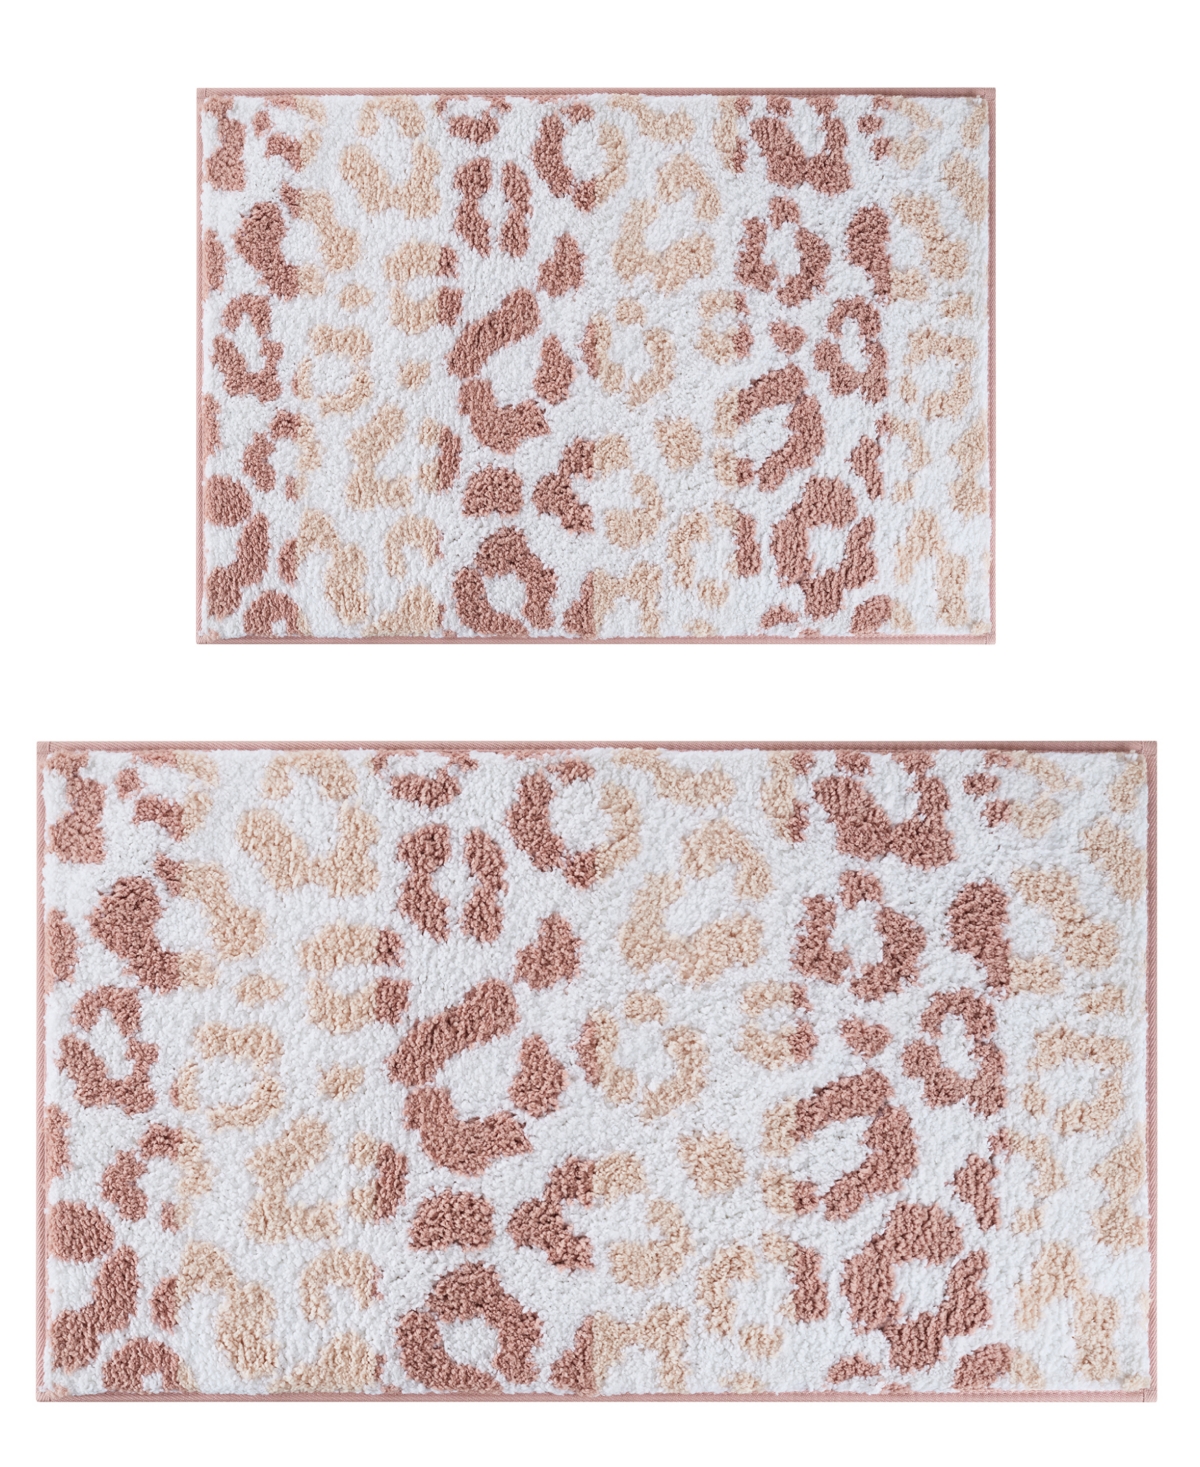 Juicy Couture Ombre Leopard 2-piece Bath Rug Set Bedding In Pink